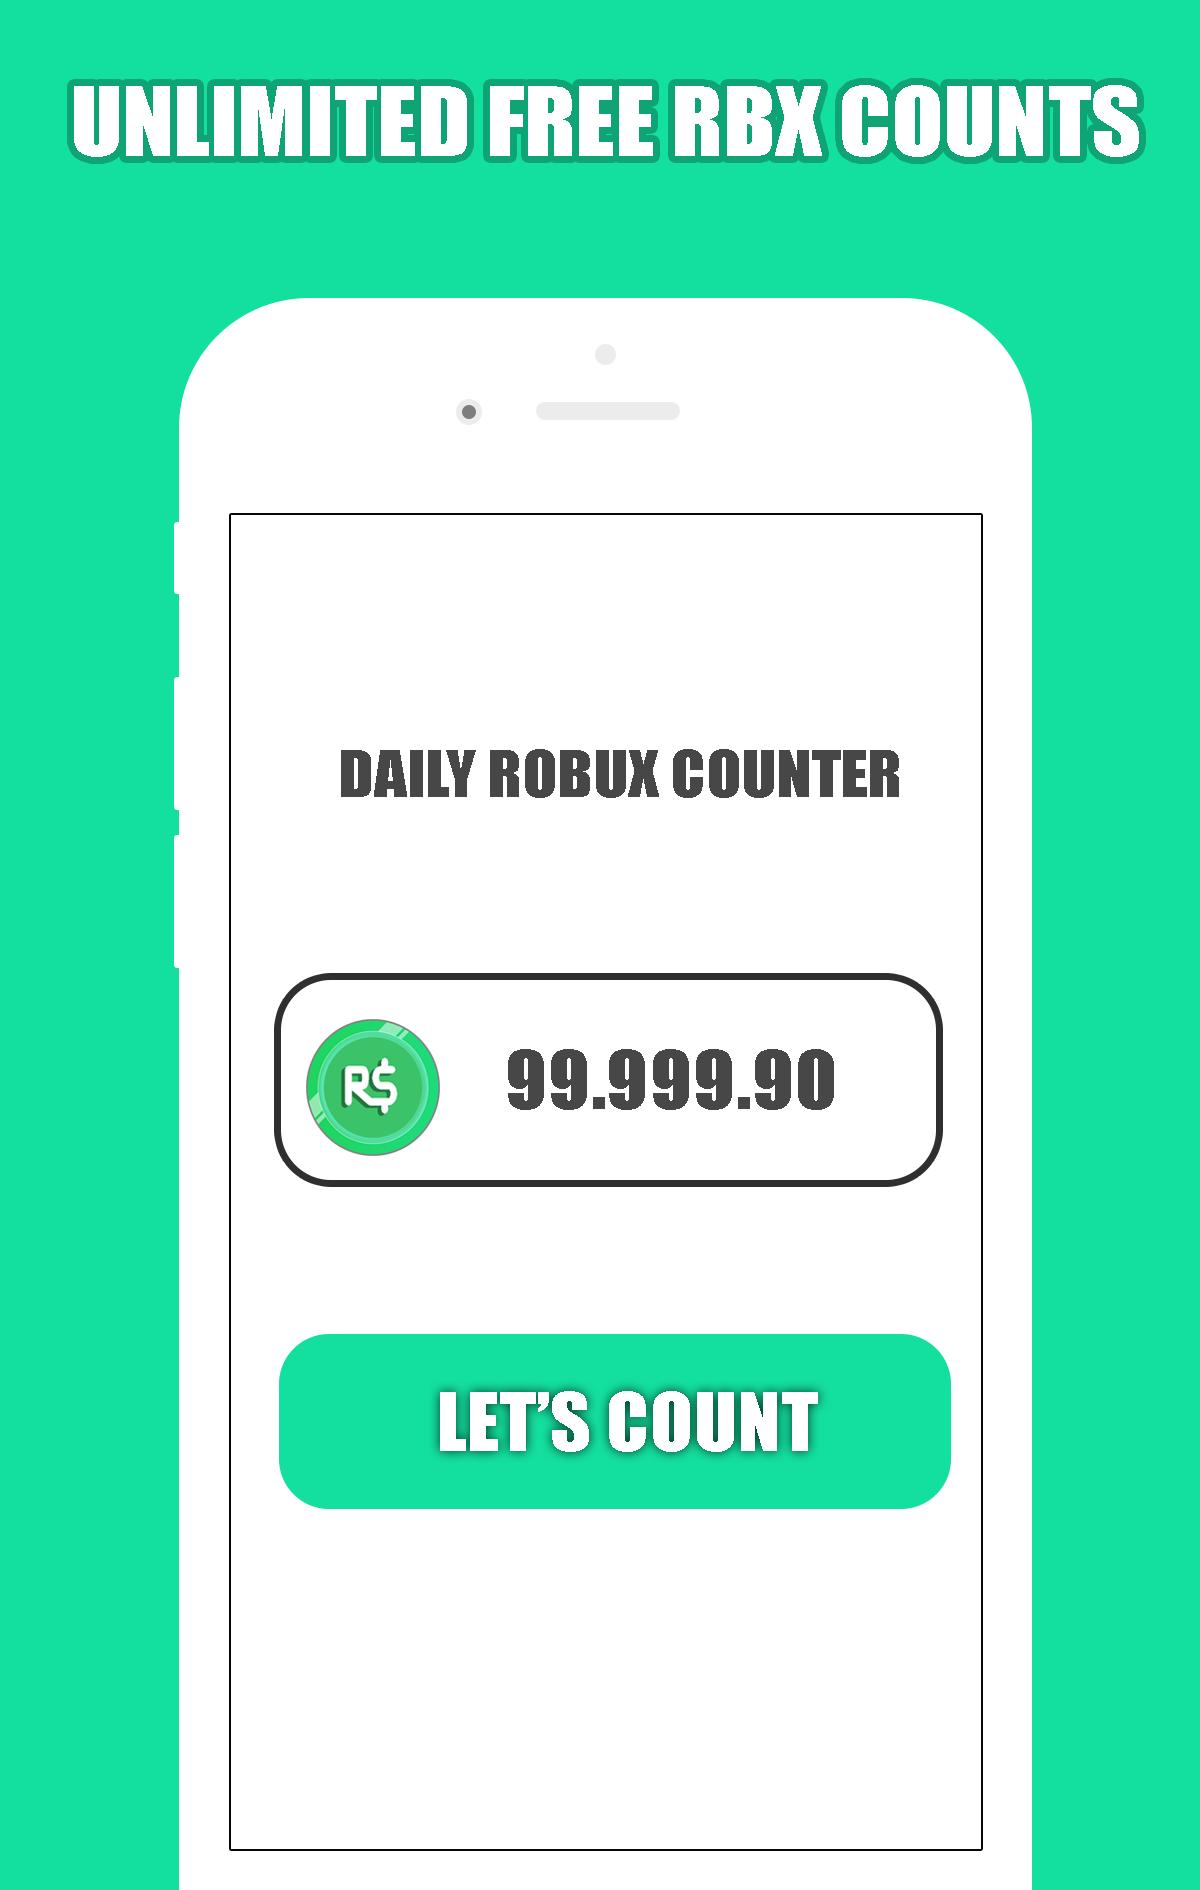 Free Robux Counter For Roblox - RBX Masters for Android ... - 